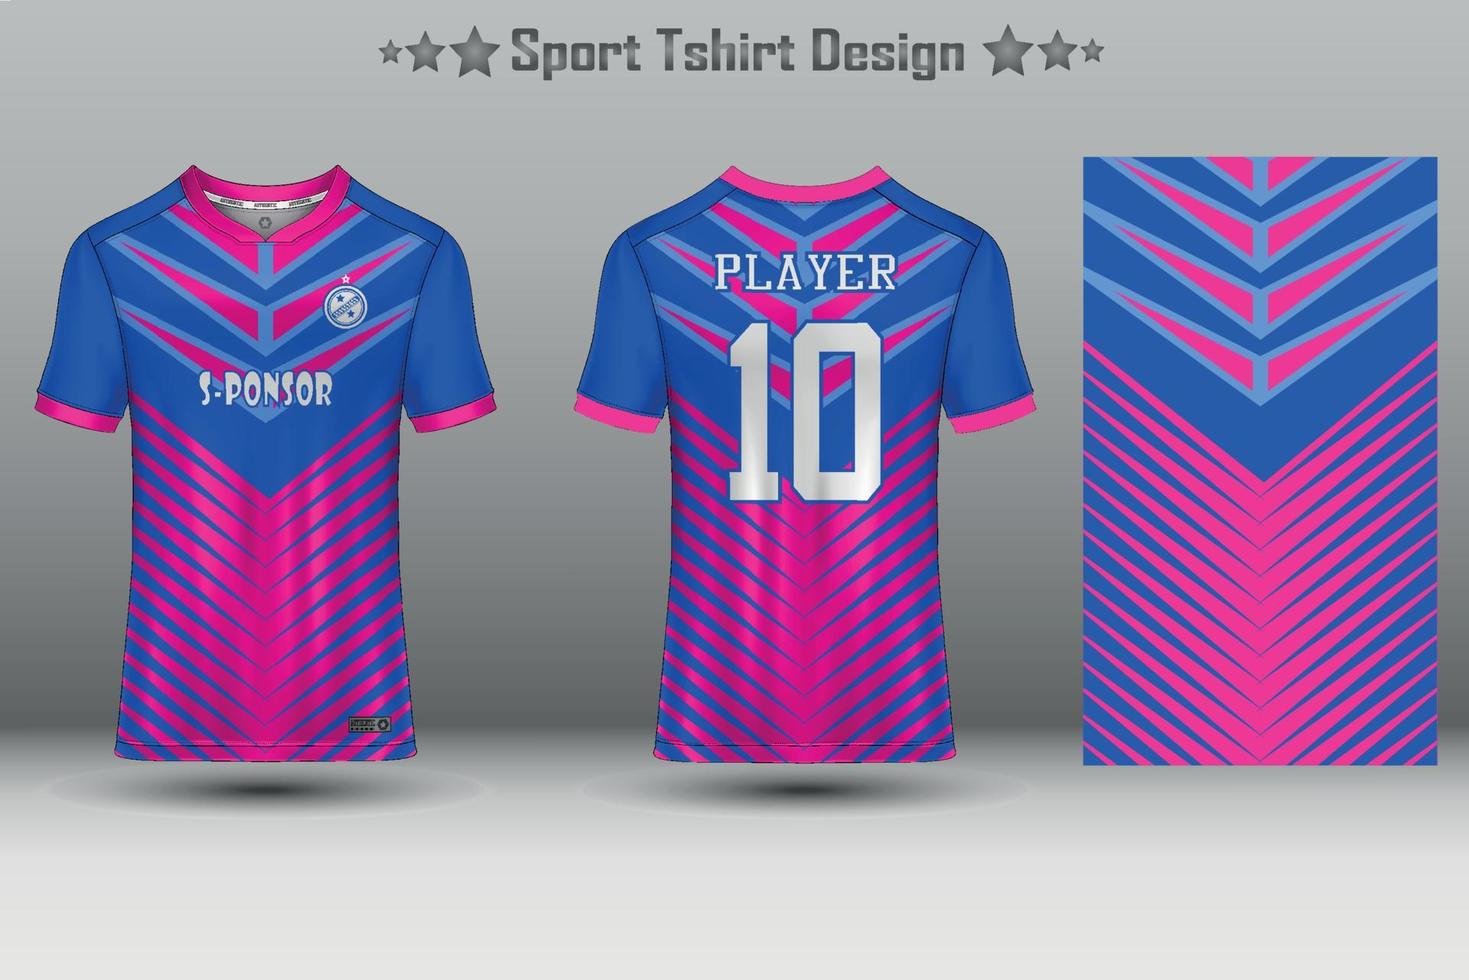 Soccer jersey mockup football jersey design sublimation sport t shirt design collection for racing, cycling, gaming, motocross vector